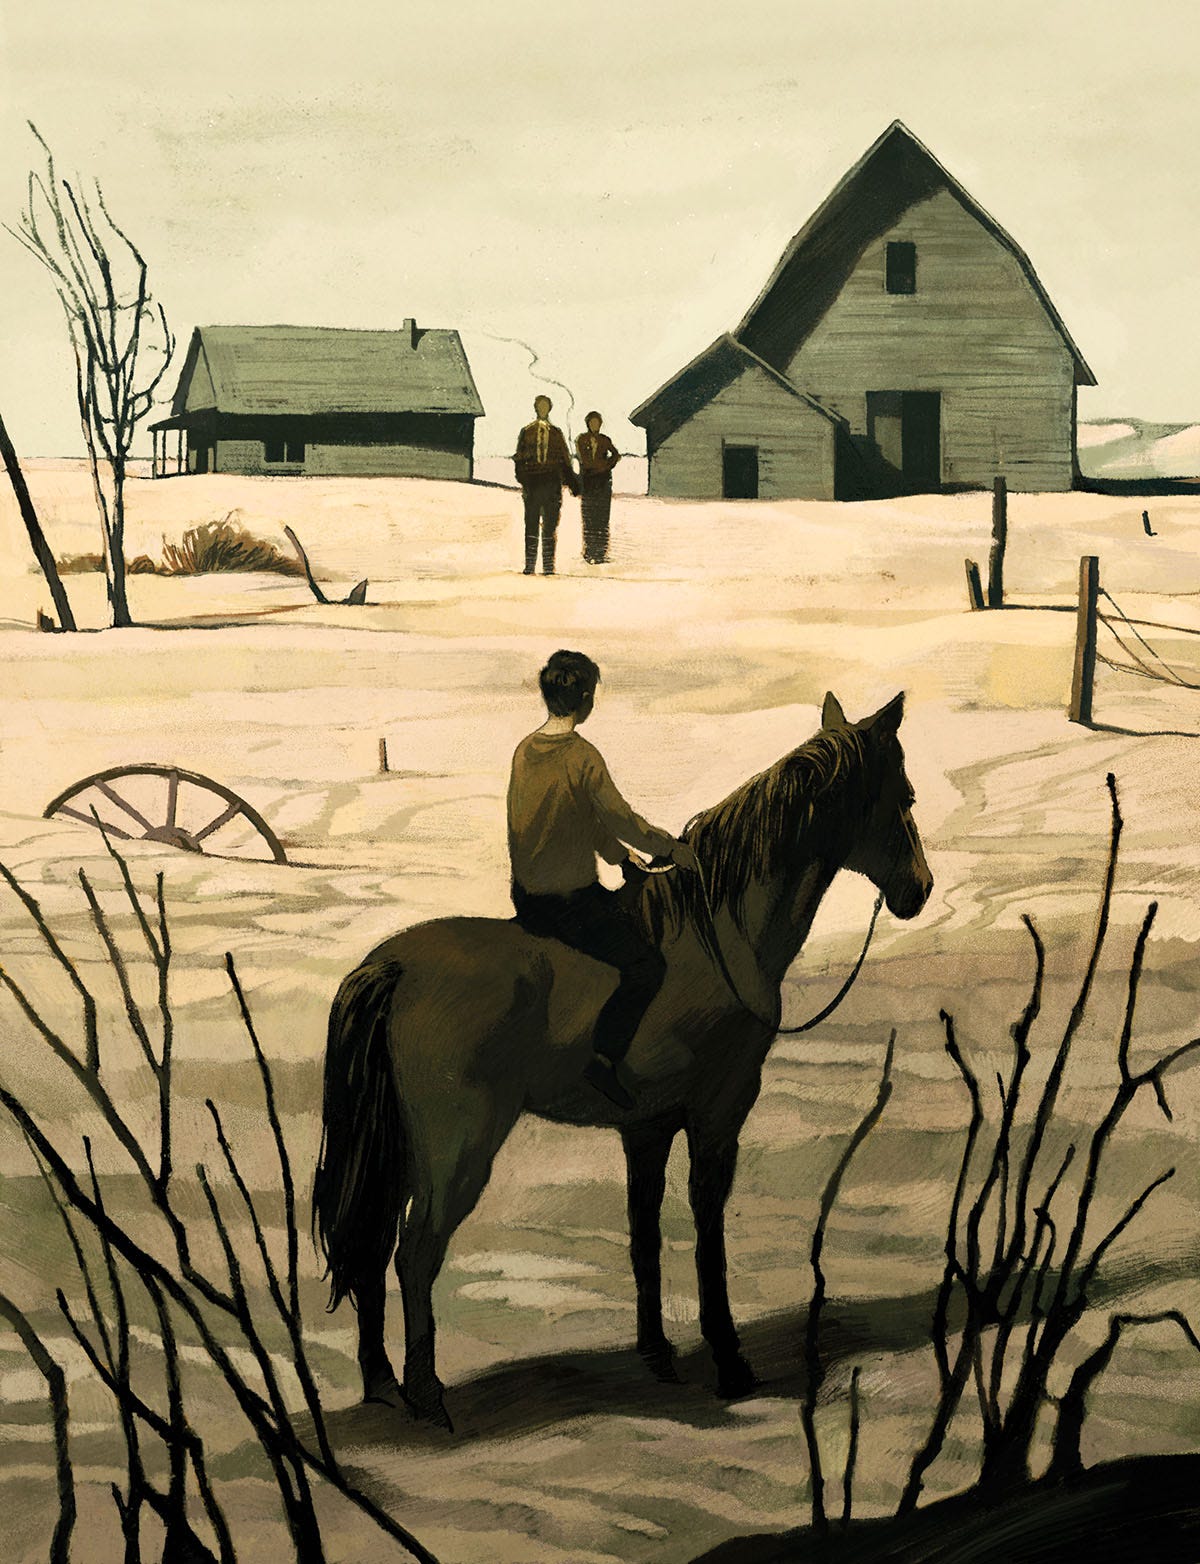 An illustration of a person on horseback looking toward a barn and house with two people standing nearby